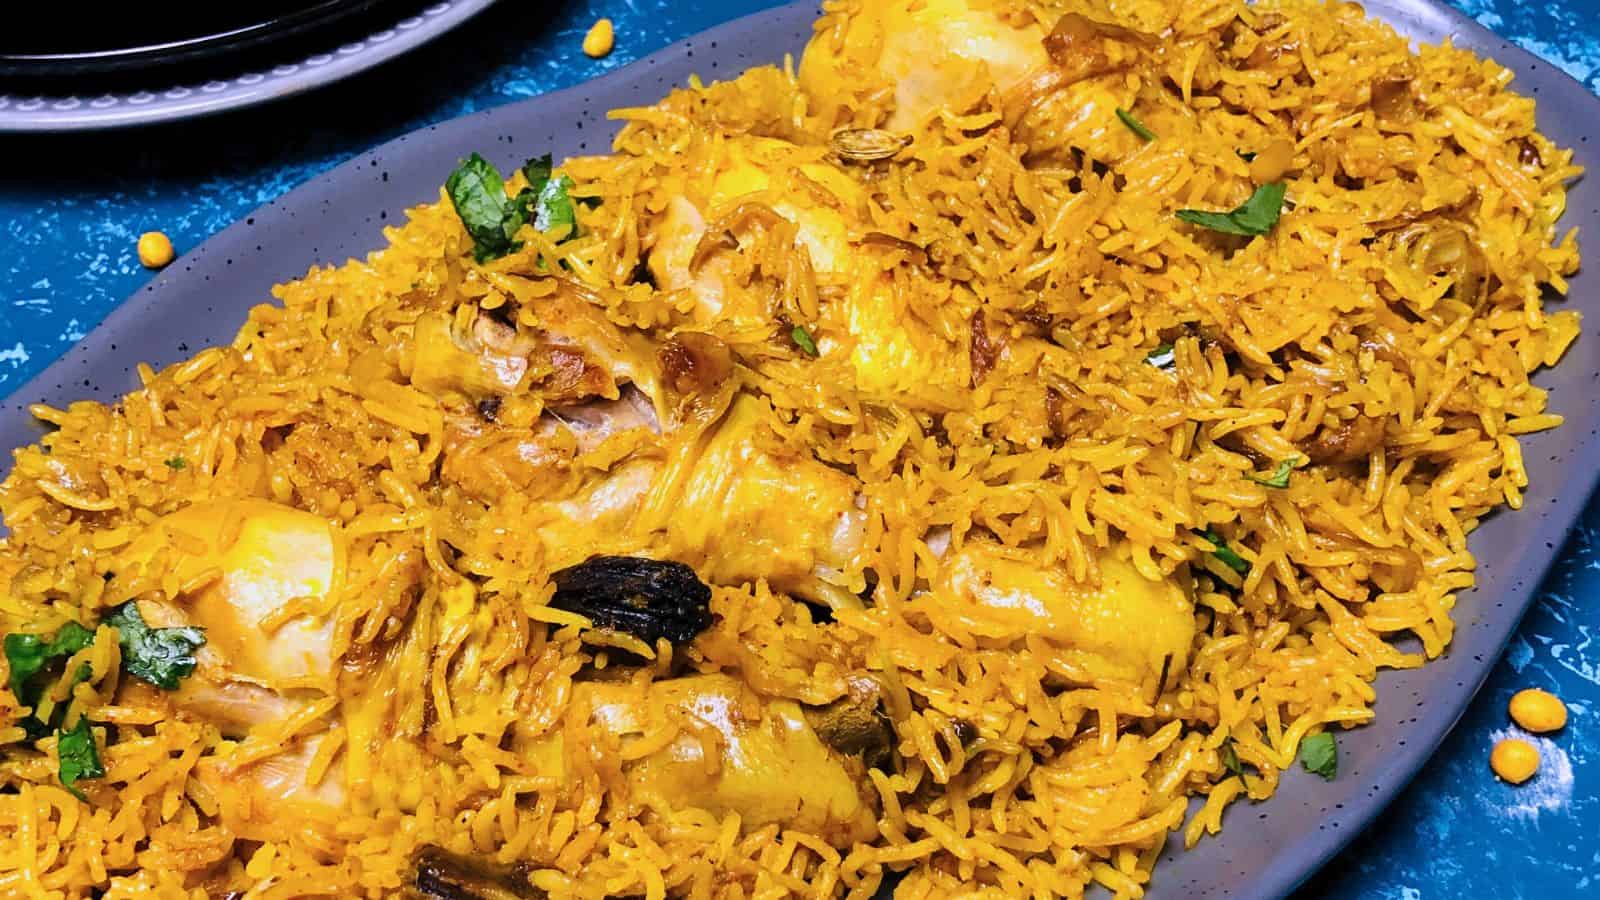 A platter of Chicken Pulao with vibrant yellow rice, herbs, and chicken pieces, served in a blue dish.